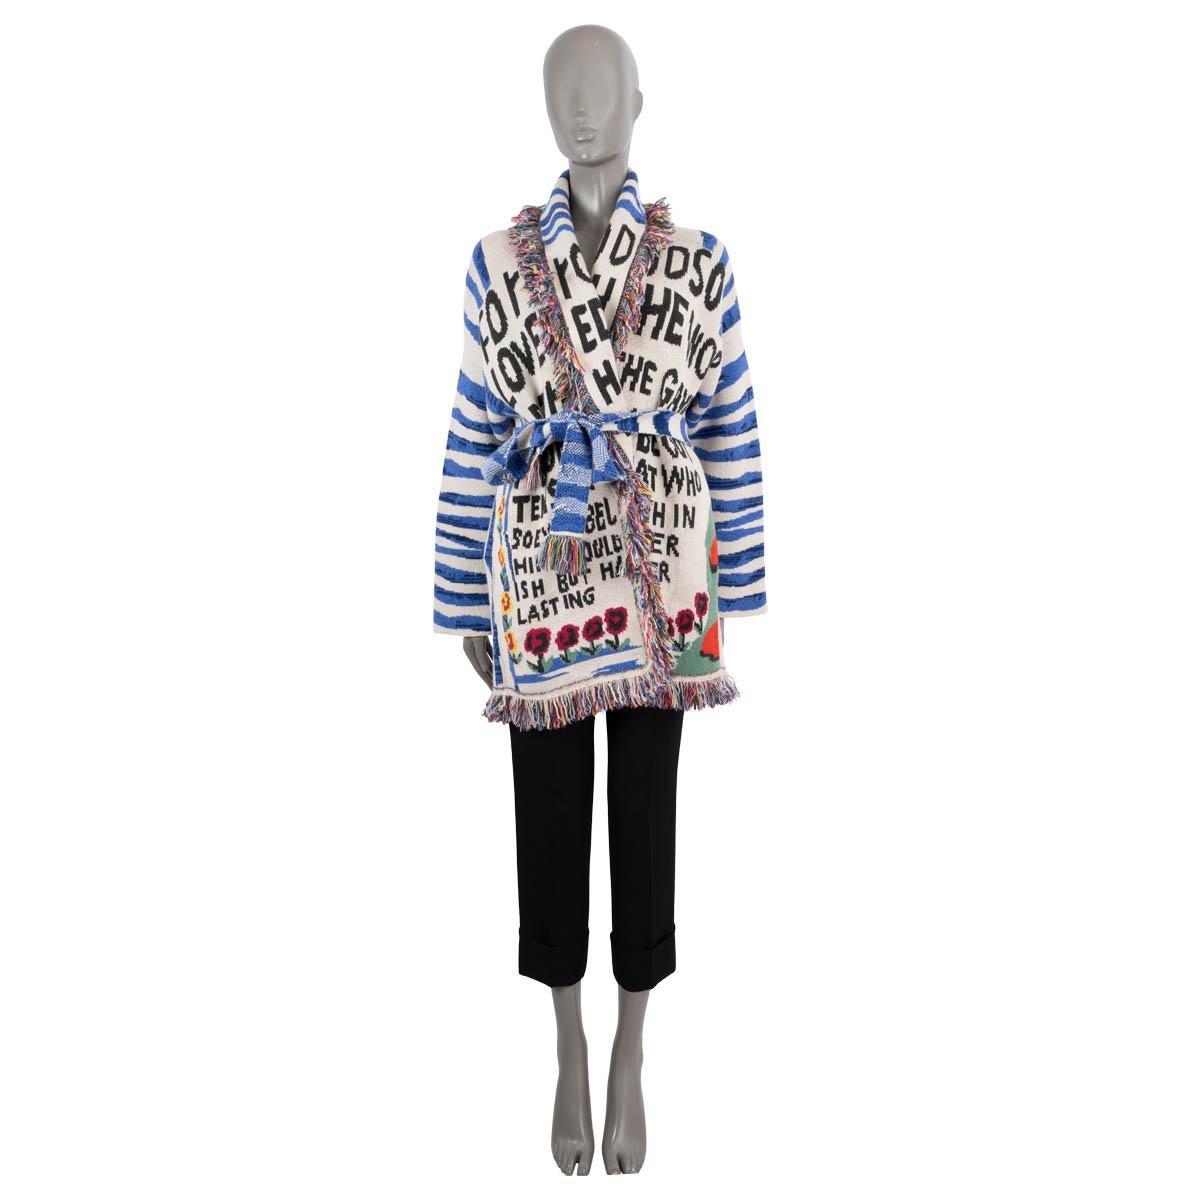 100% authentic Alanui Salvation Mountains long sleeve oversized belted cardigan in multicolor cashmere (100%). The design features a shawl collar and a fringed hem. Has been worn and is in excellent condition. 

Measurements
Tag